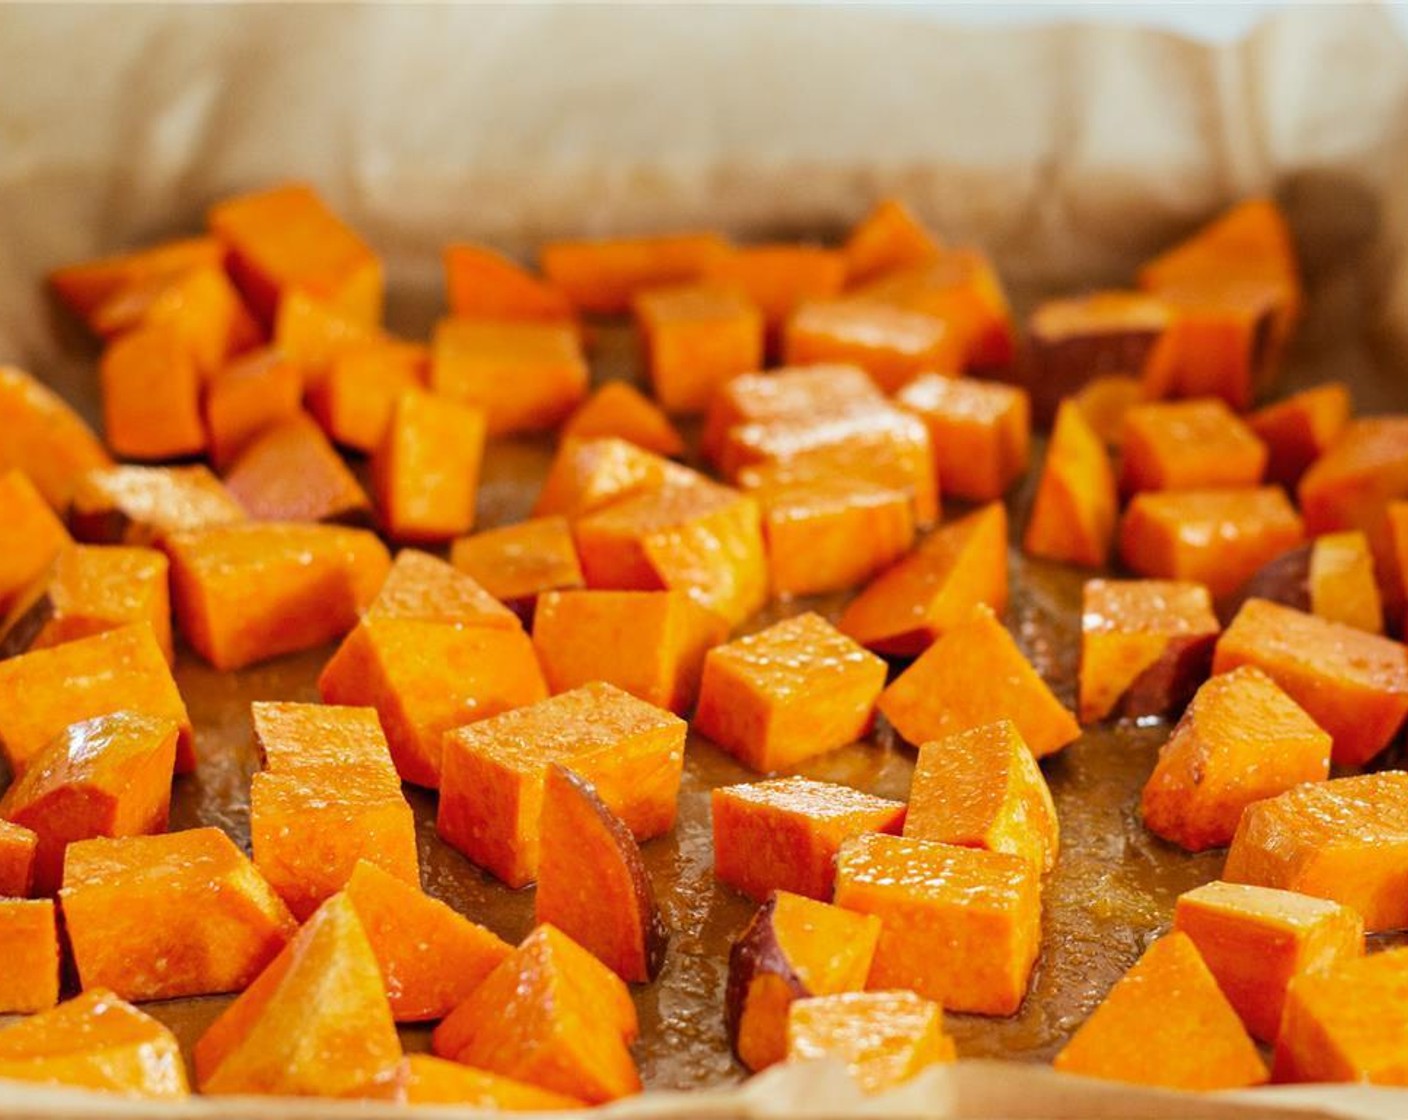 step 3 Line a sheet pan with parchment paper. Toss the sweet potatoes on the parchment paper with Coconut Oil (1 Tbsp), Brown Sugar (1 Tbsp), and a sprinkle of Salt (to taste) and Ground Black Pepper (to taste). Transfer to the oven to roast for an hour, flipping halfway through.